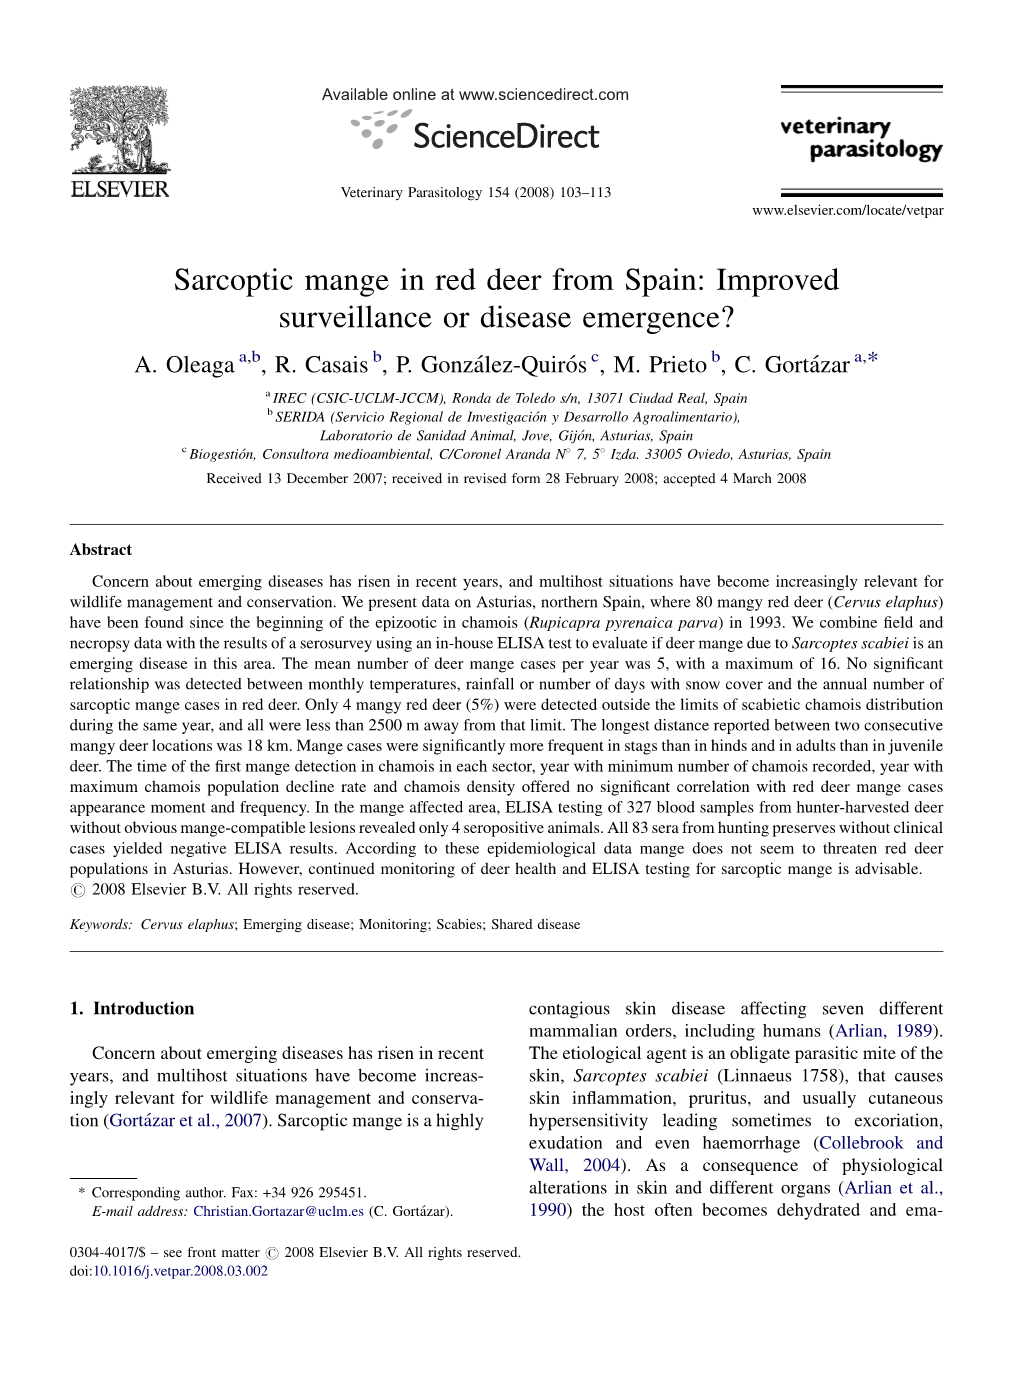 Sarcoptic Mange in Red Deer from Spain: Improved Surveillance Or Disease Emergence? A